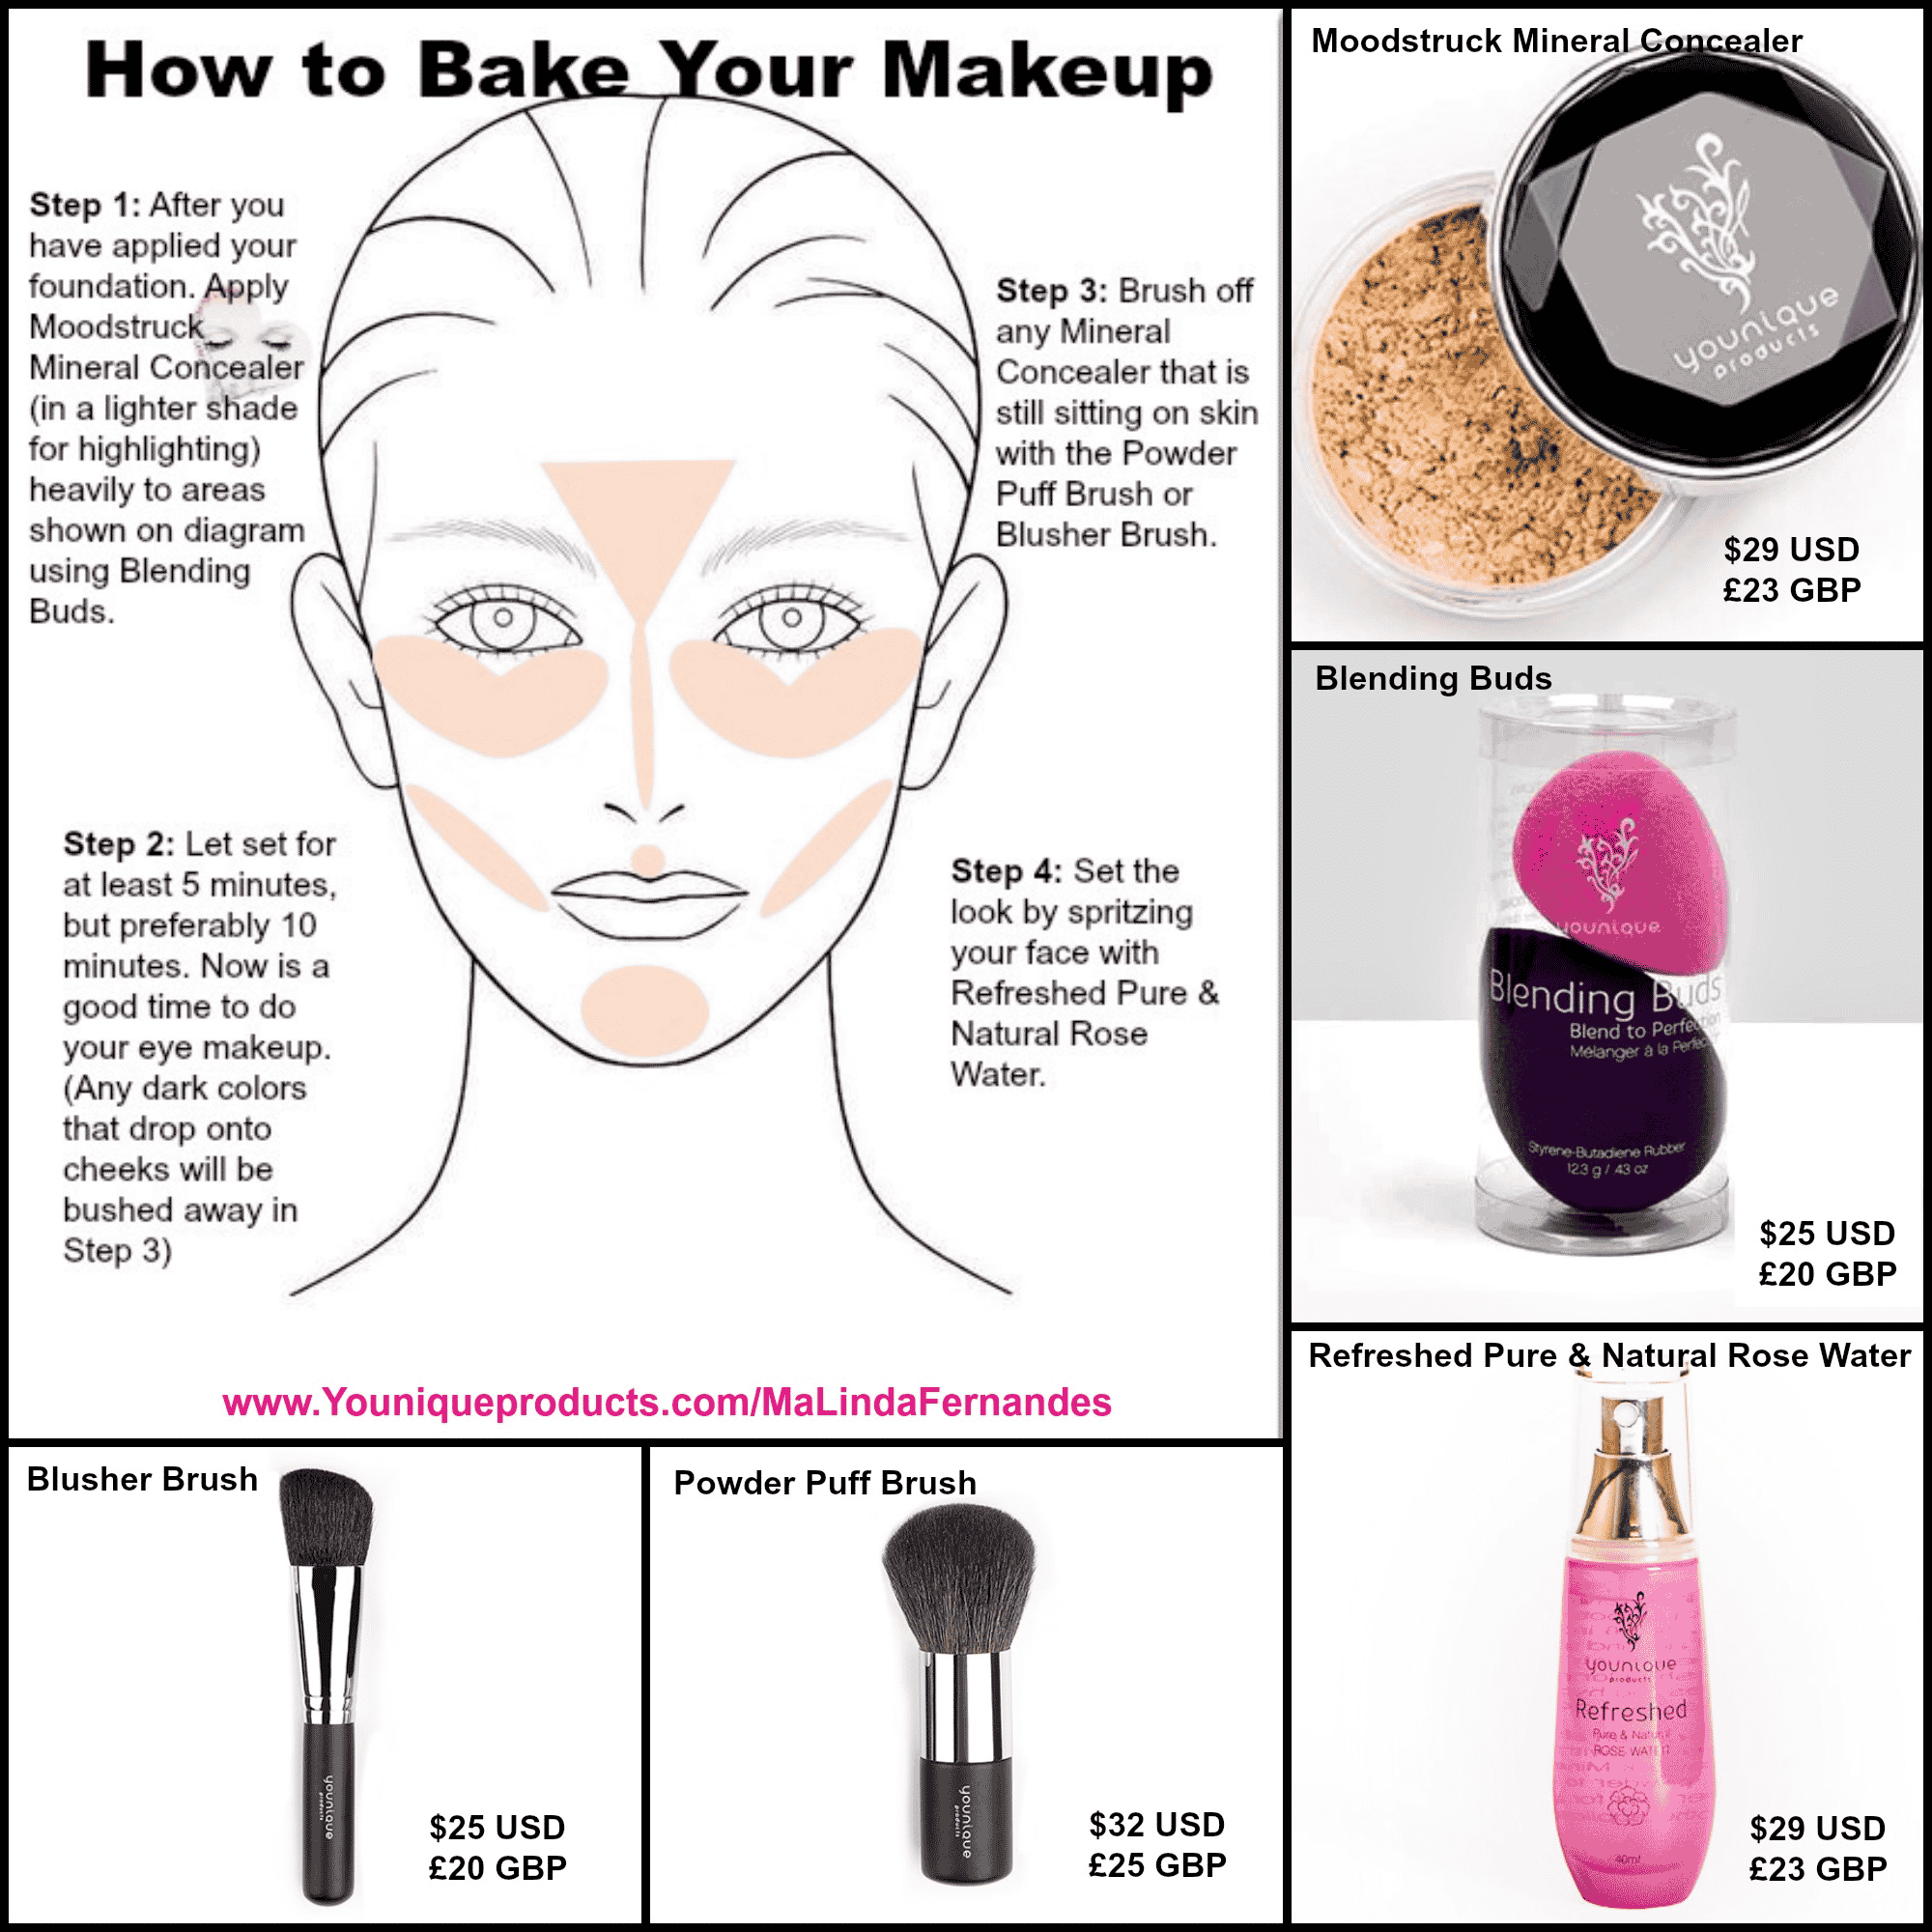 New Trend...Bake Your Face!